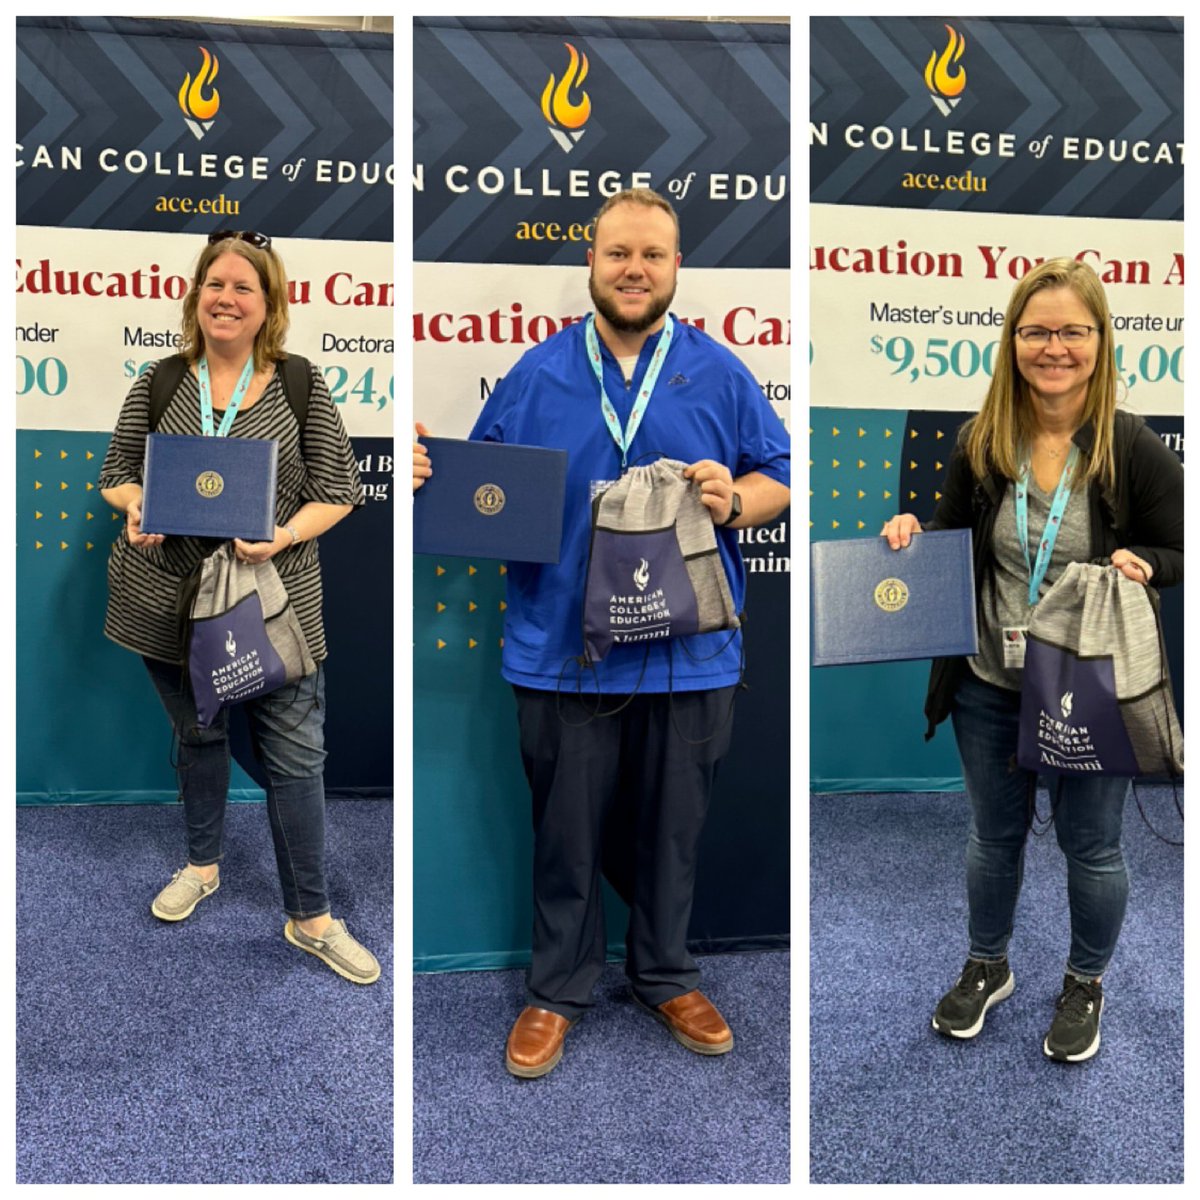 Thank you, Lora, Tammy and Eastin for stopping by to chat today at #OETC23! All three obtained their M.Ed. in Educational Leadership through @ACEedu! They also advised they referred others because of the great experience they had! #ACEAlumni #OETC23